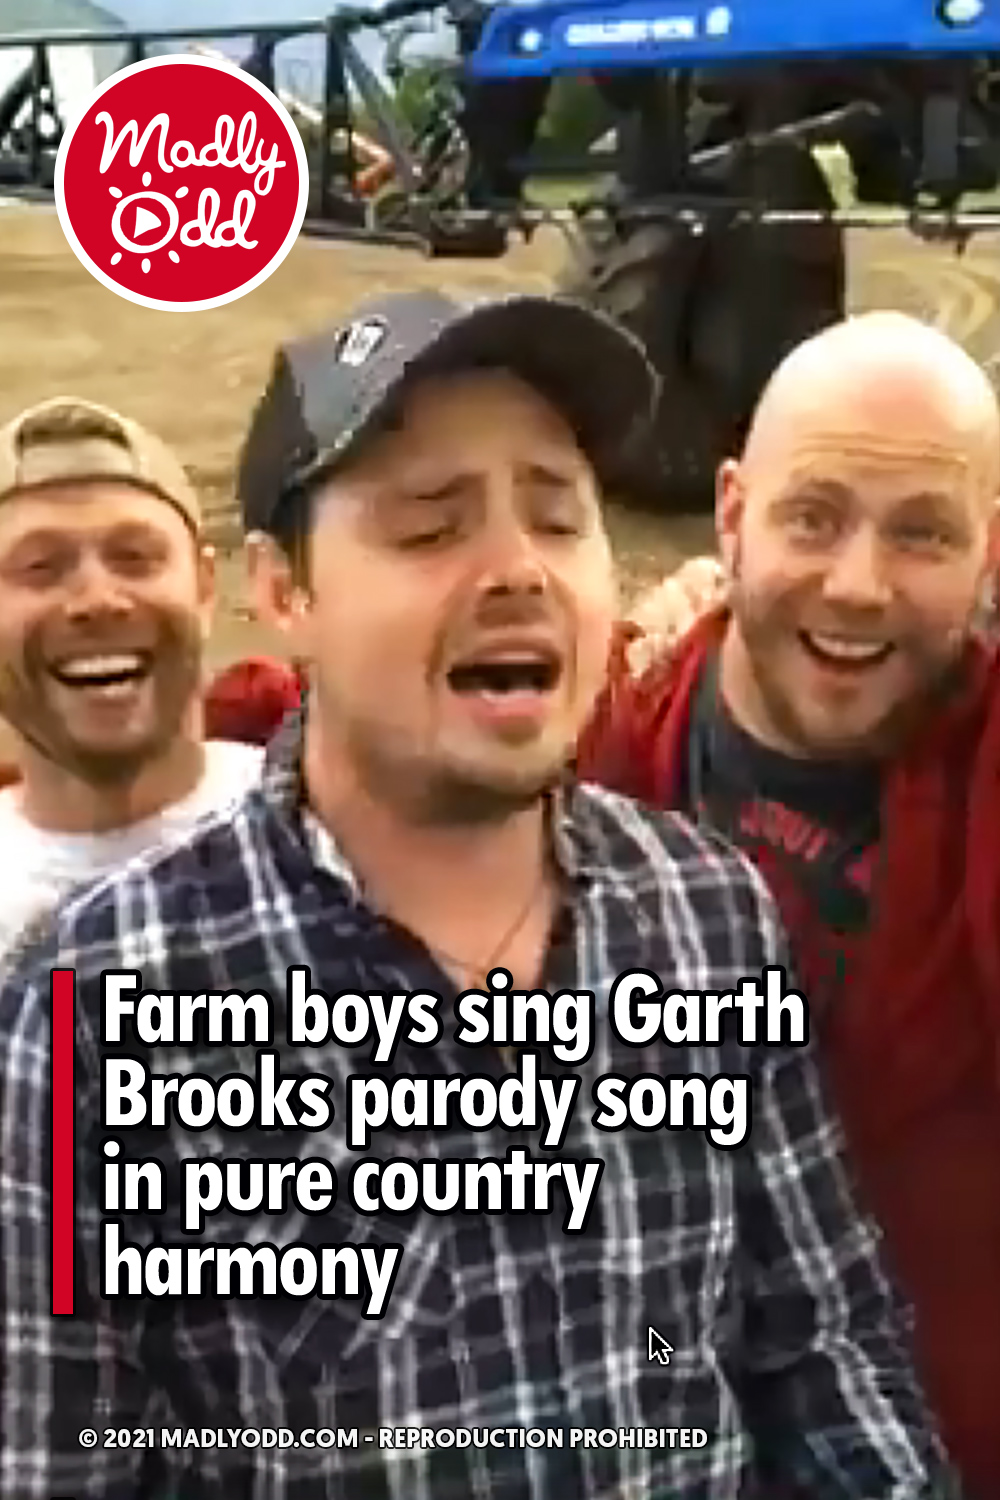 Farm boys sing Garth Brooks parody song in pure country harmony